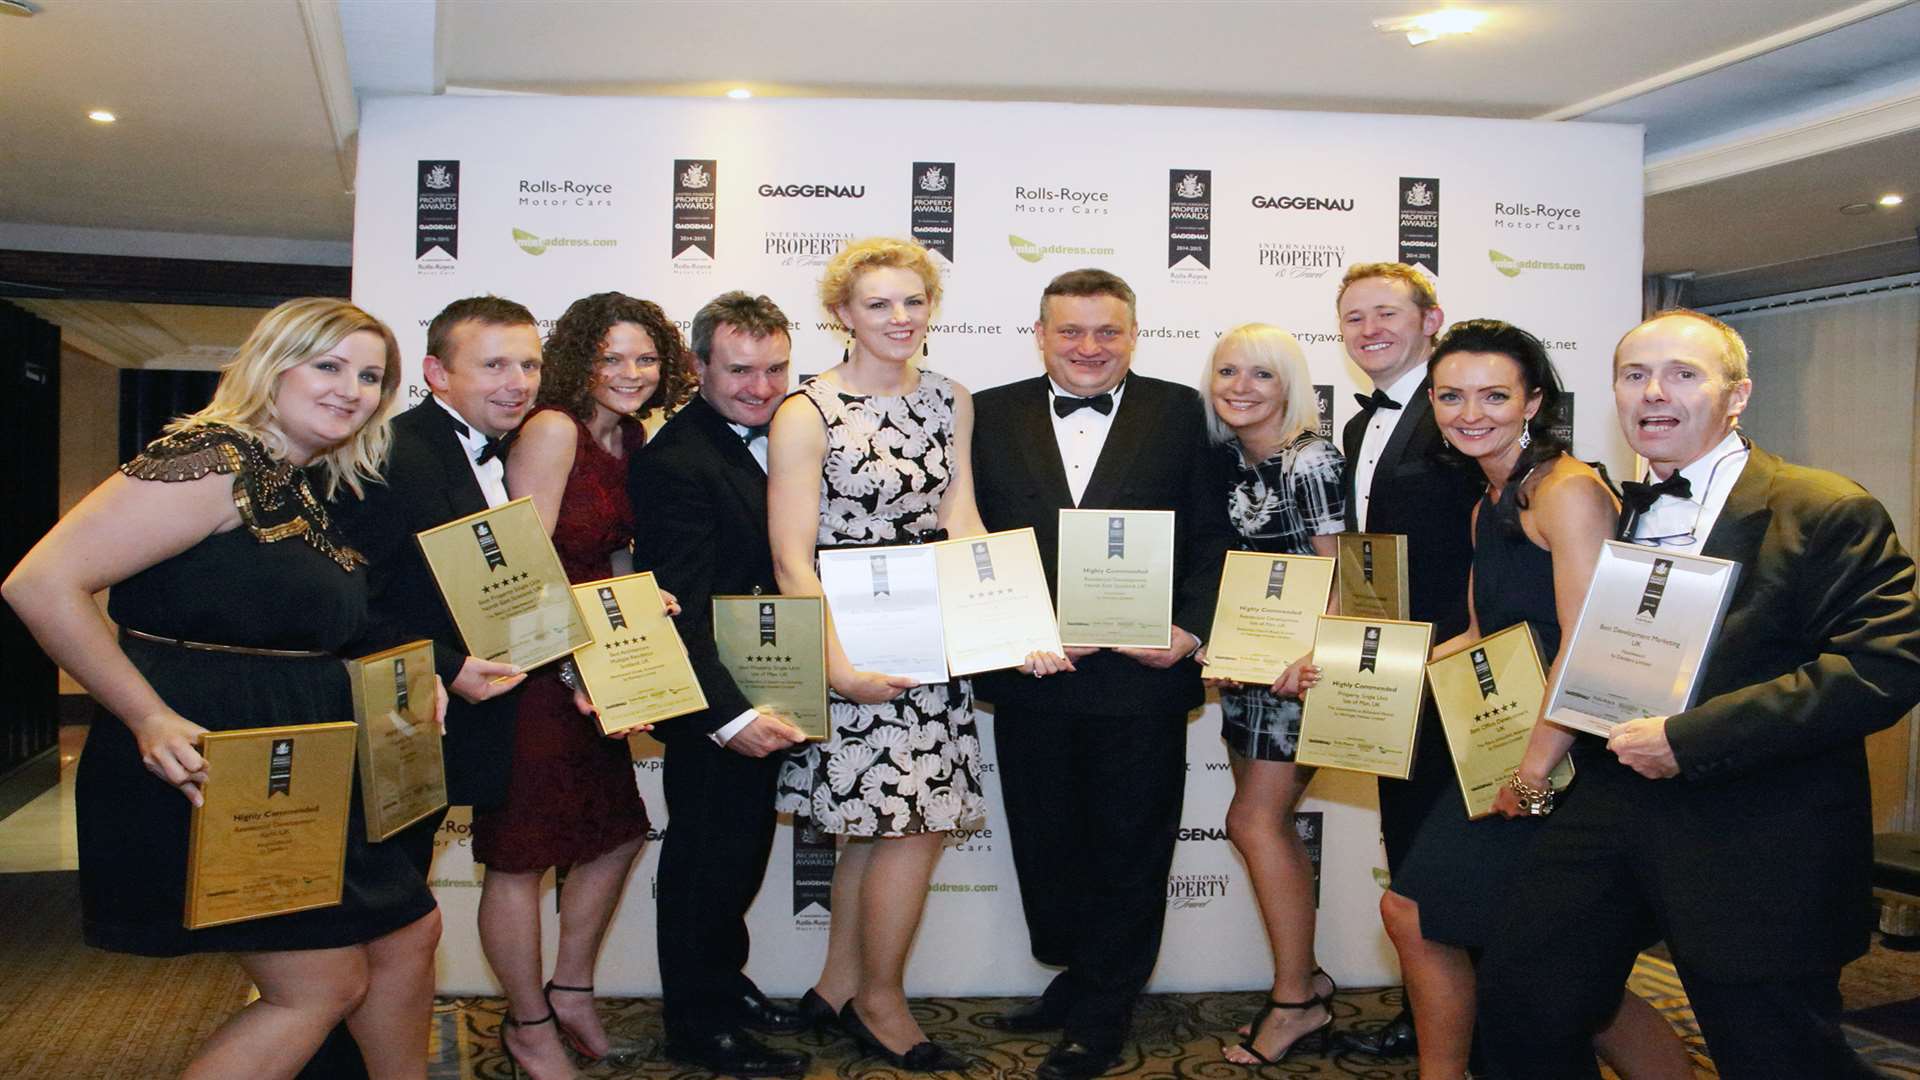 Gemma Macknelly, Sales Consultant (far left) is pictured holding the two awards received by Knights Wood, on an evening that saw Dandara triumph in 13 categories